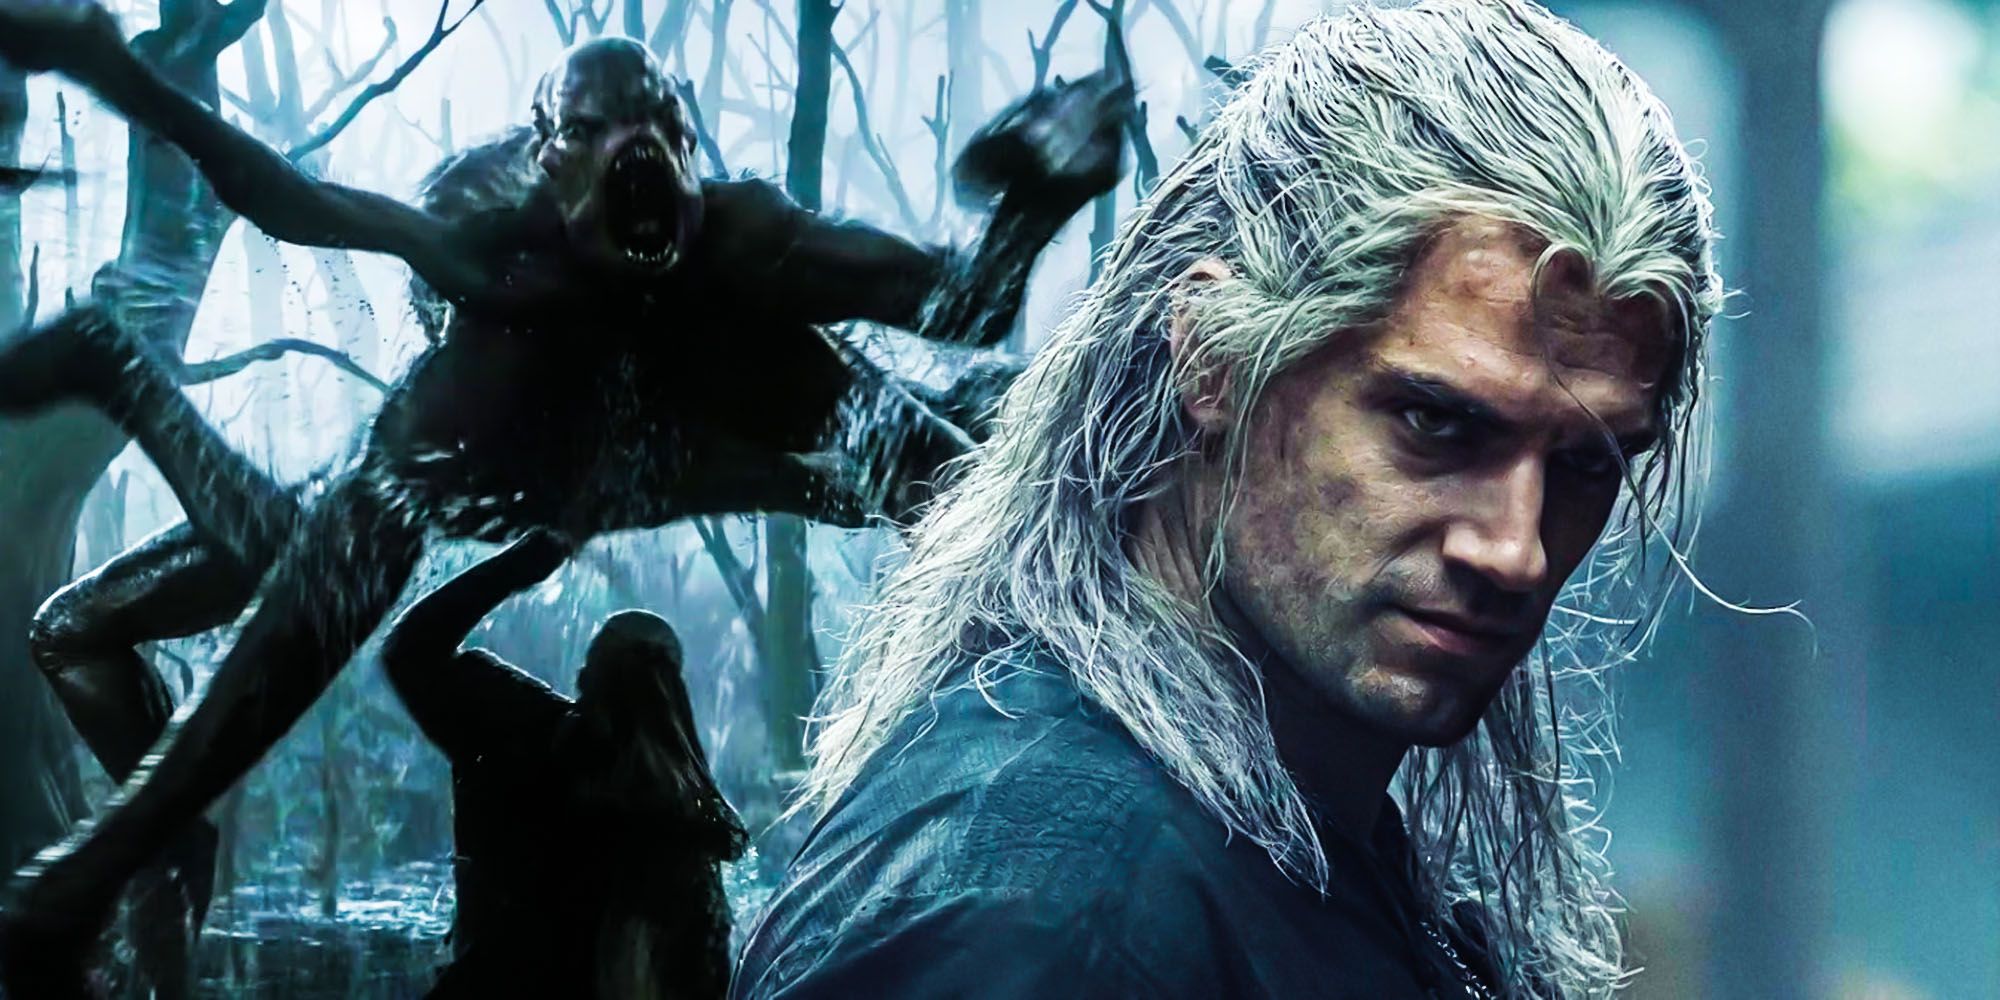 How The Witcher filmed the Kikimore Fight